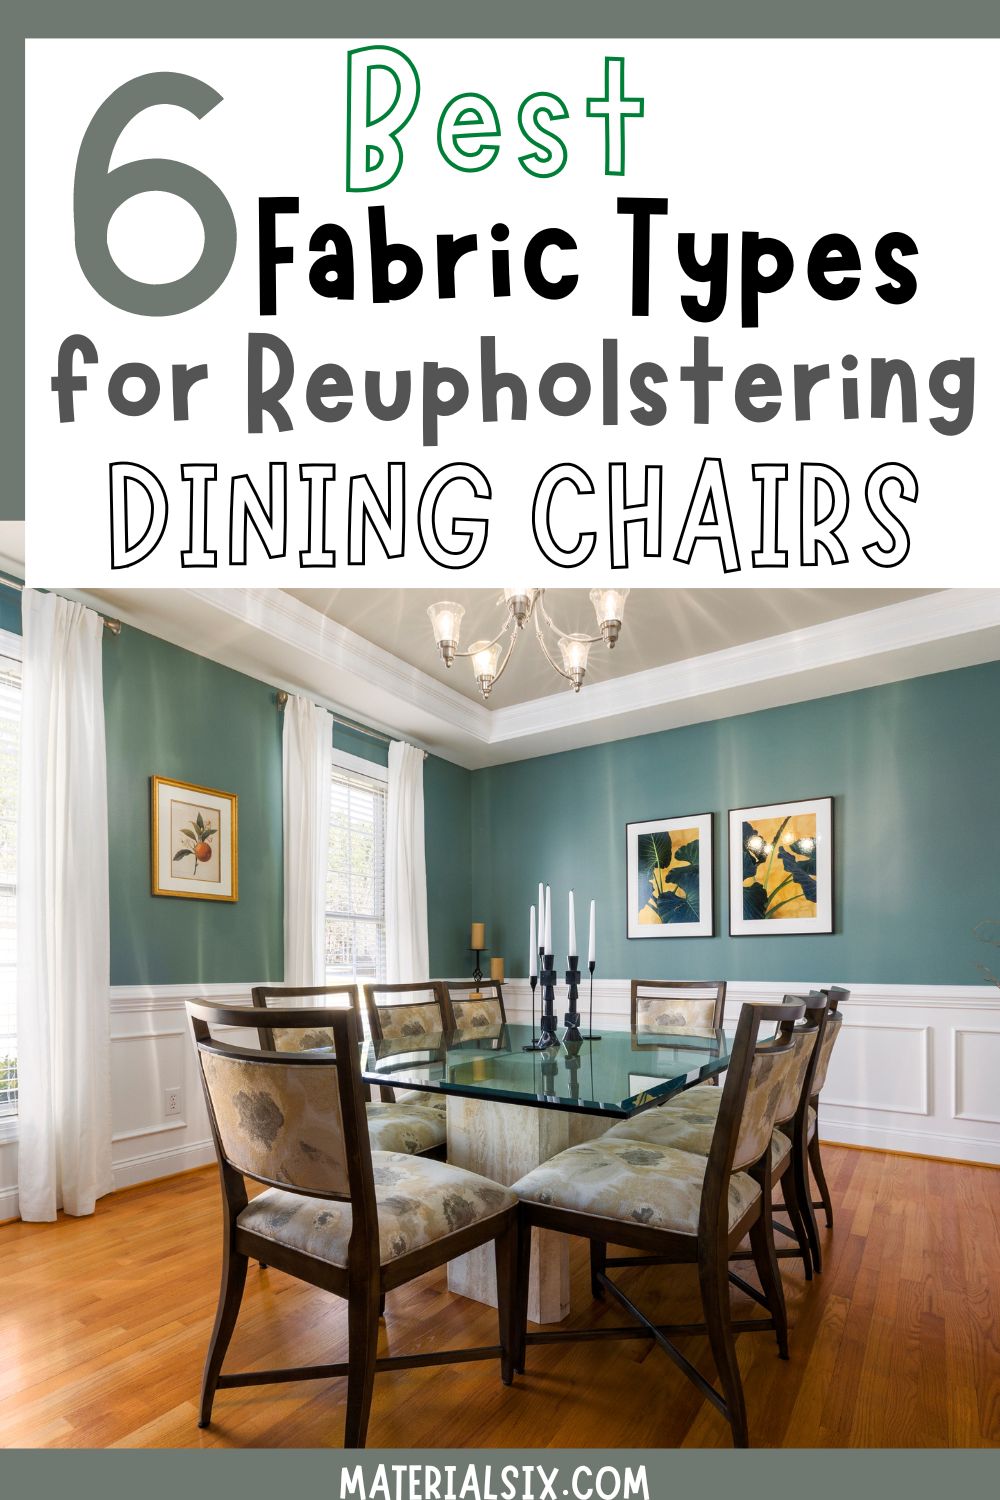 Types of fabrics for reupholstering dining chairs